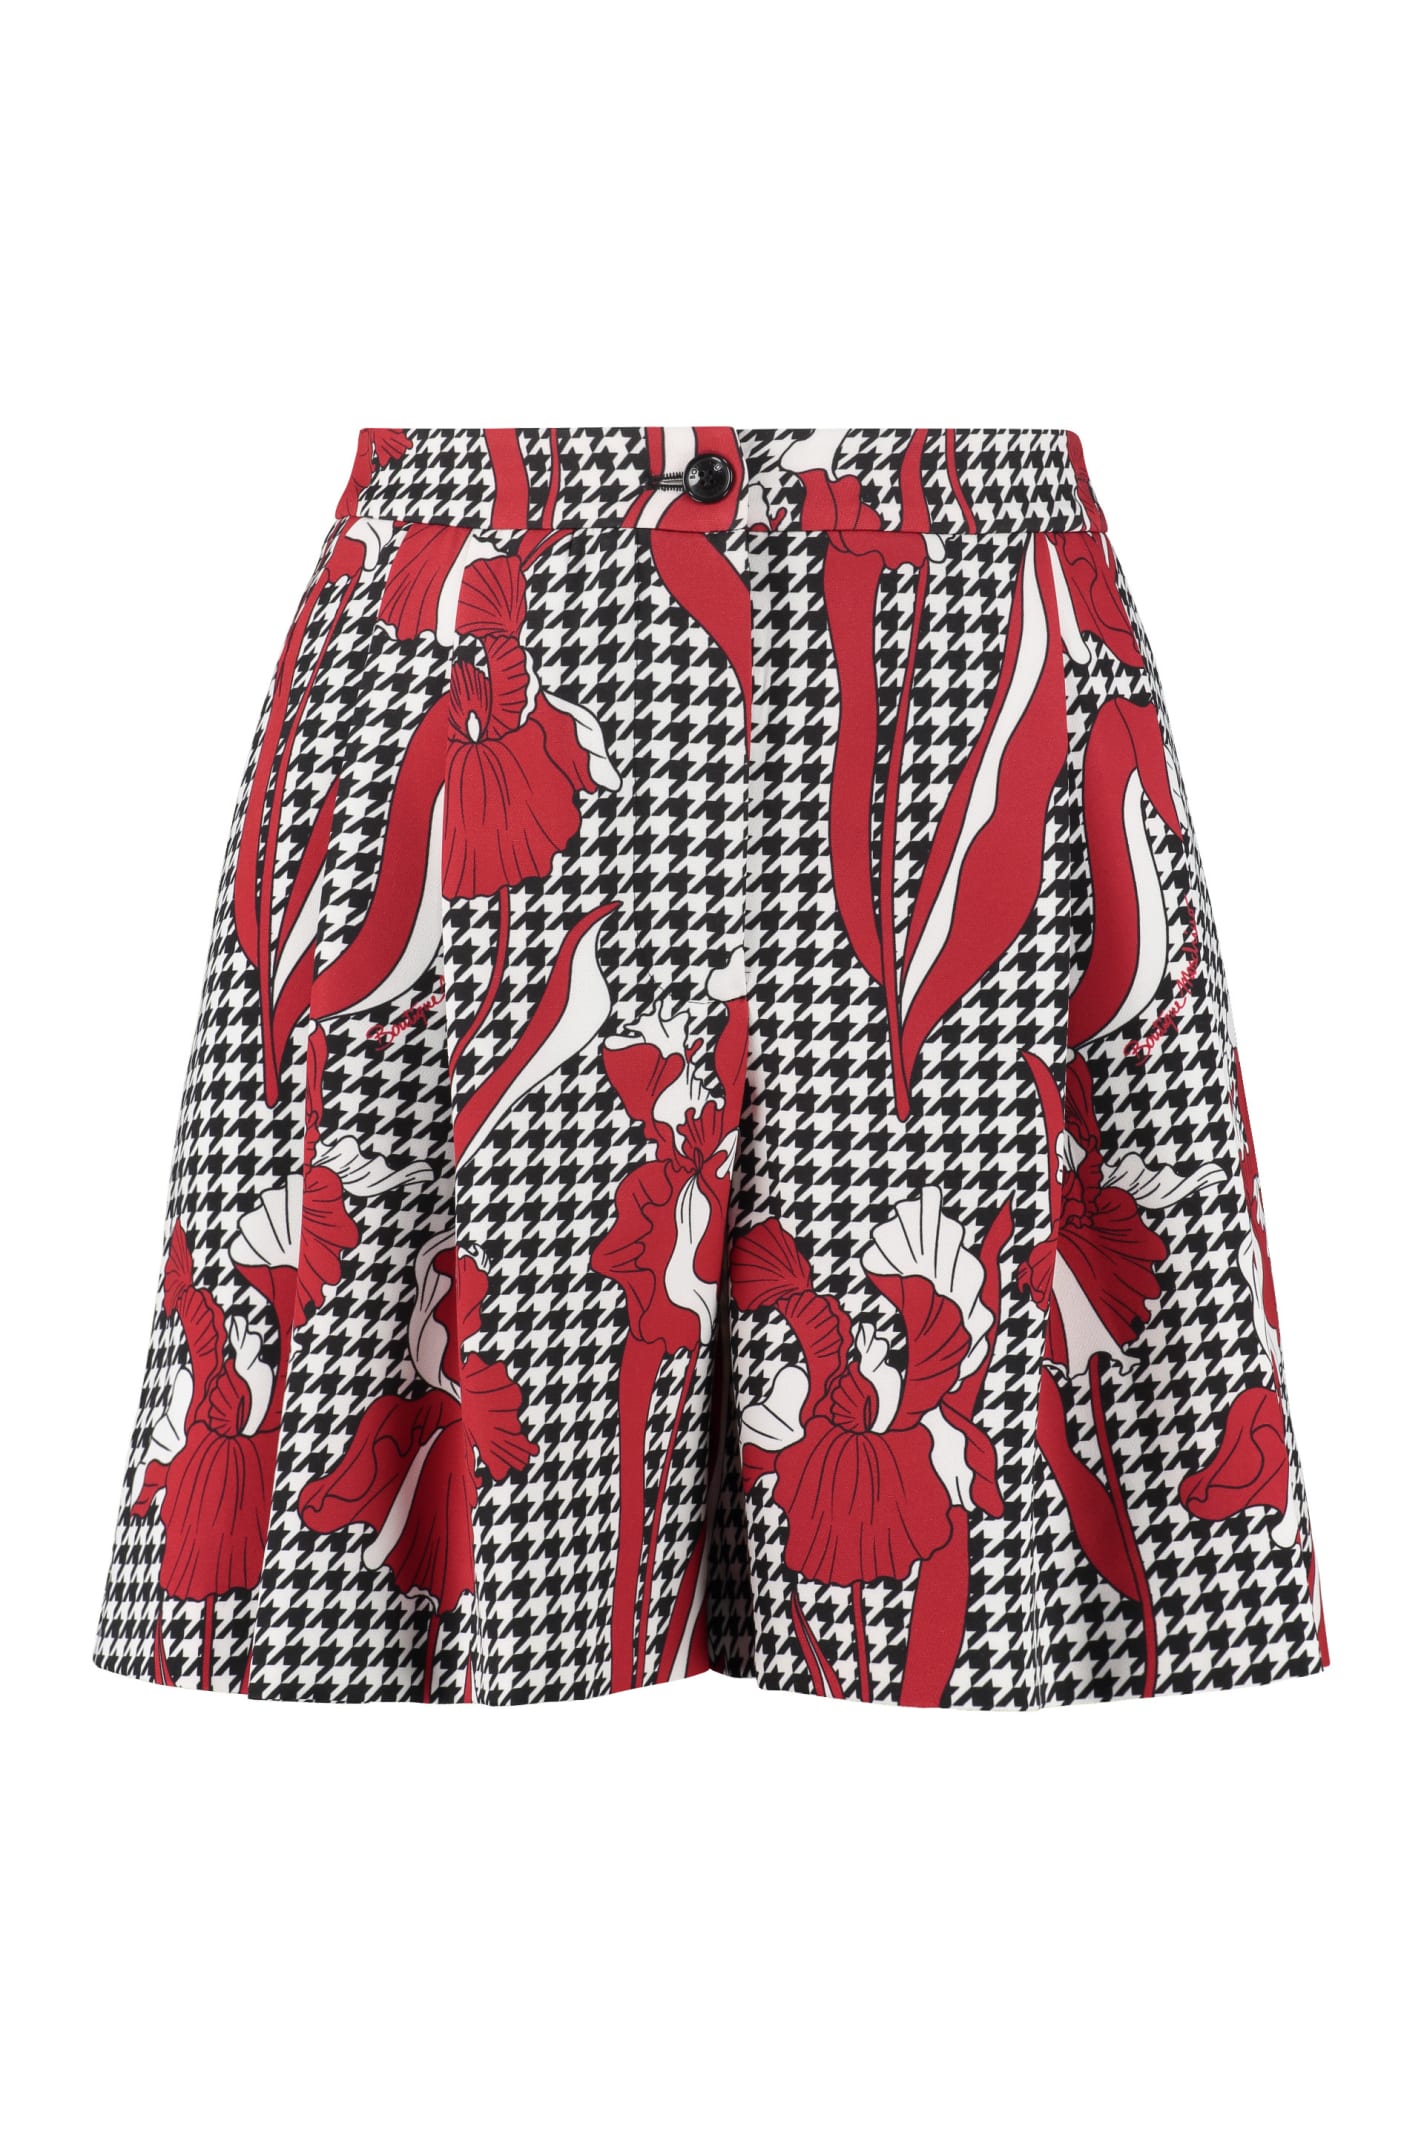 Boutique Moschino Houndstooth Shorts